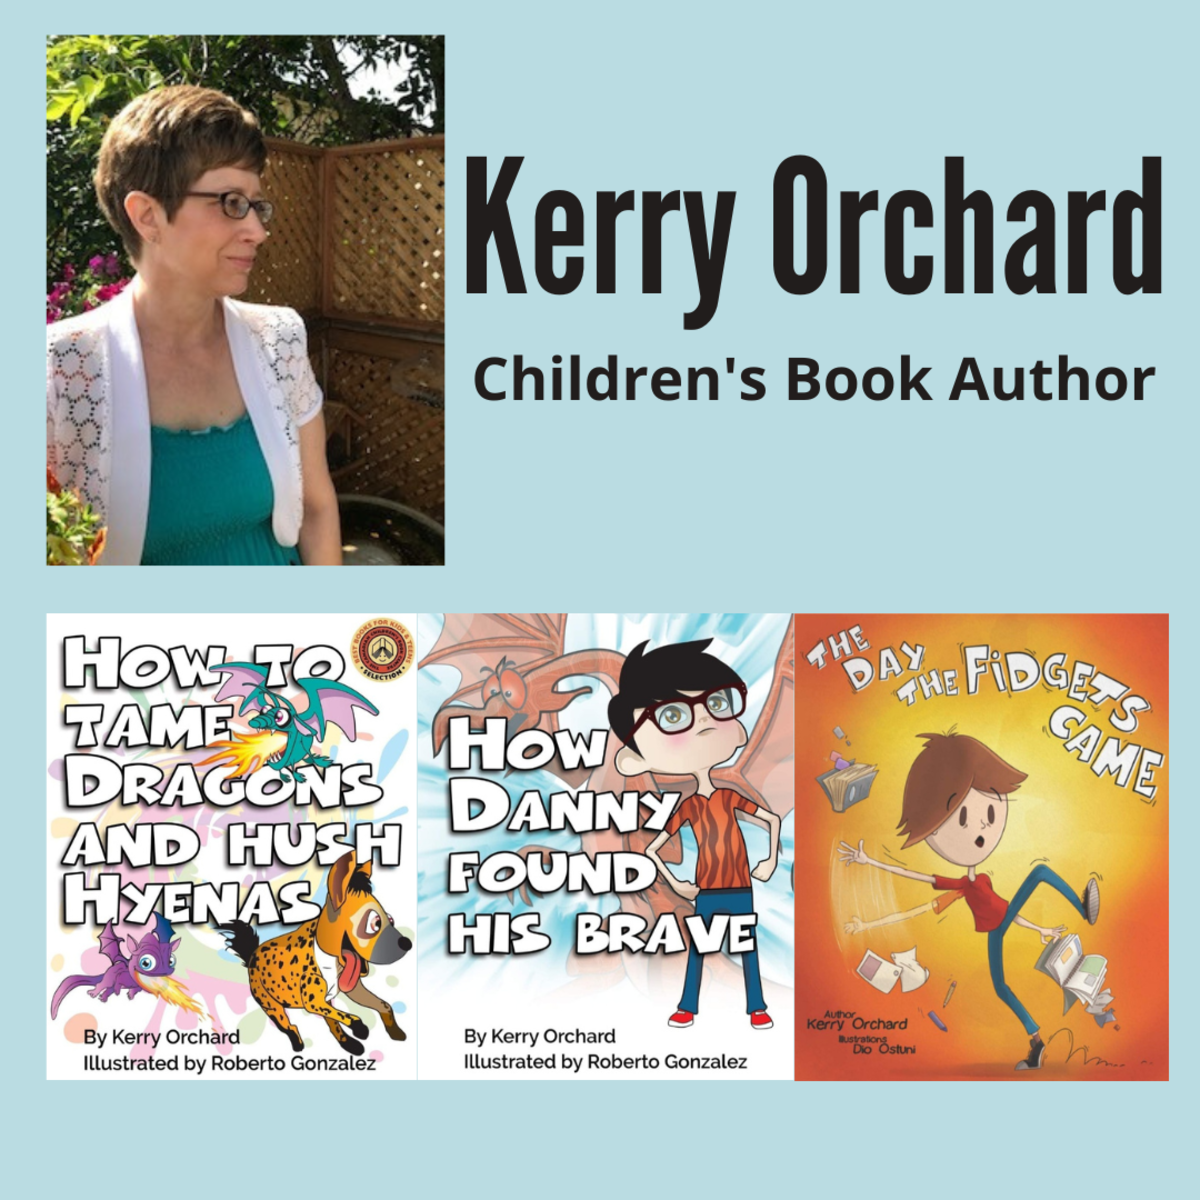 Children’s Books by Kerry Orchard